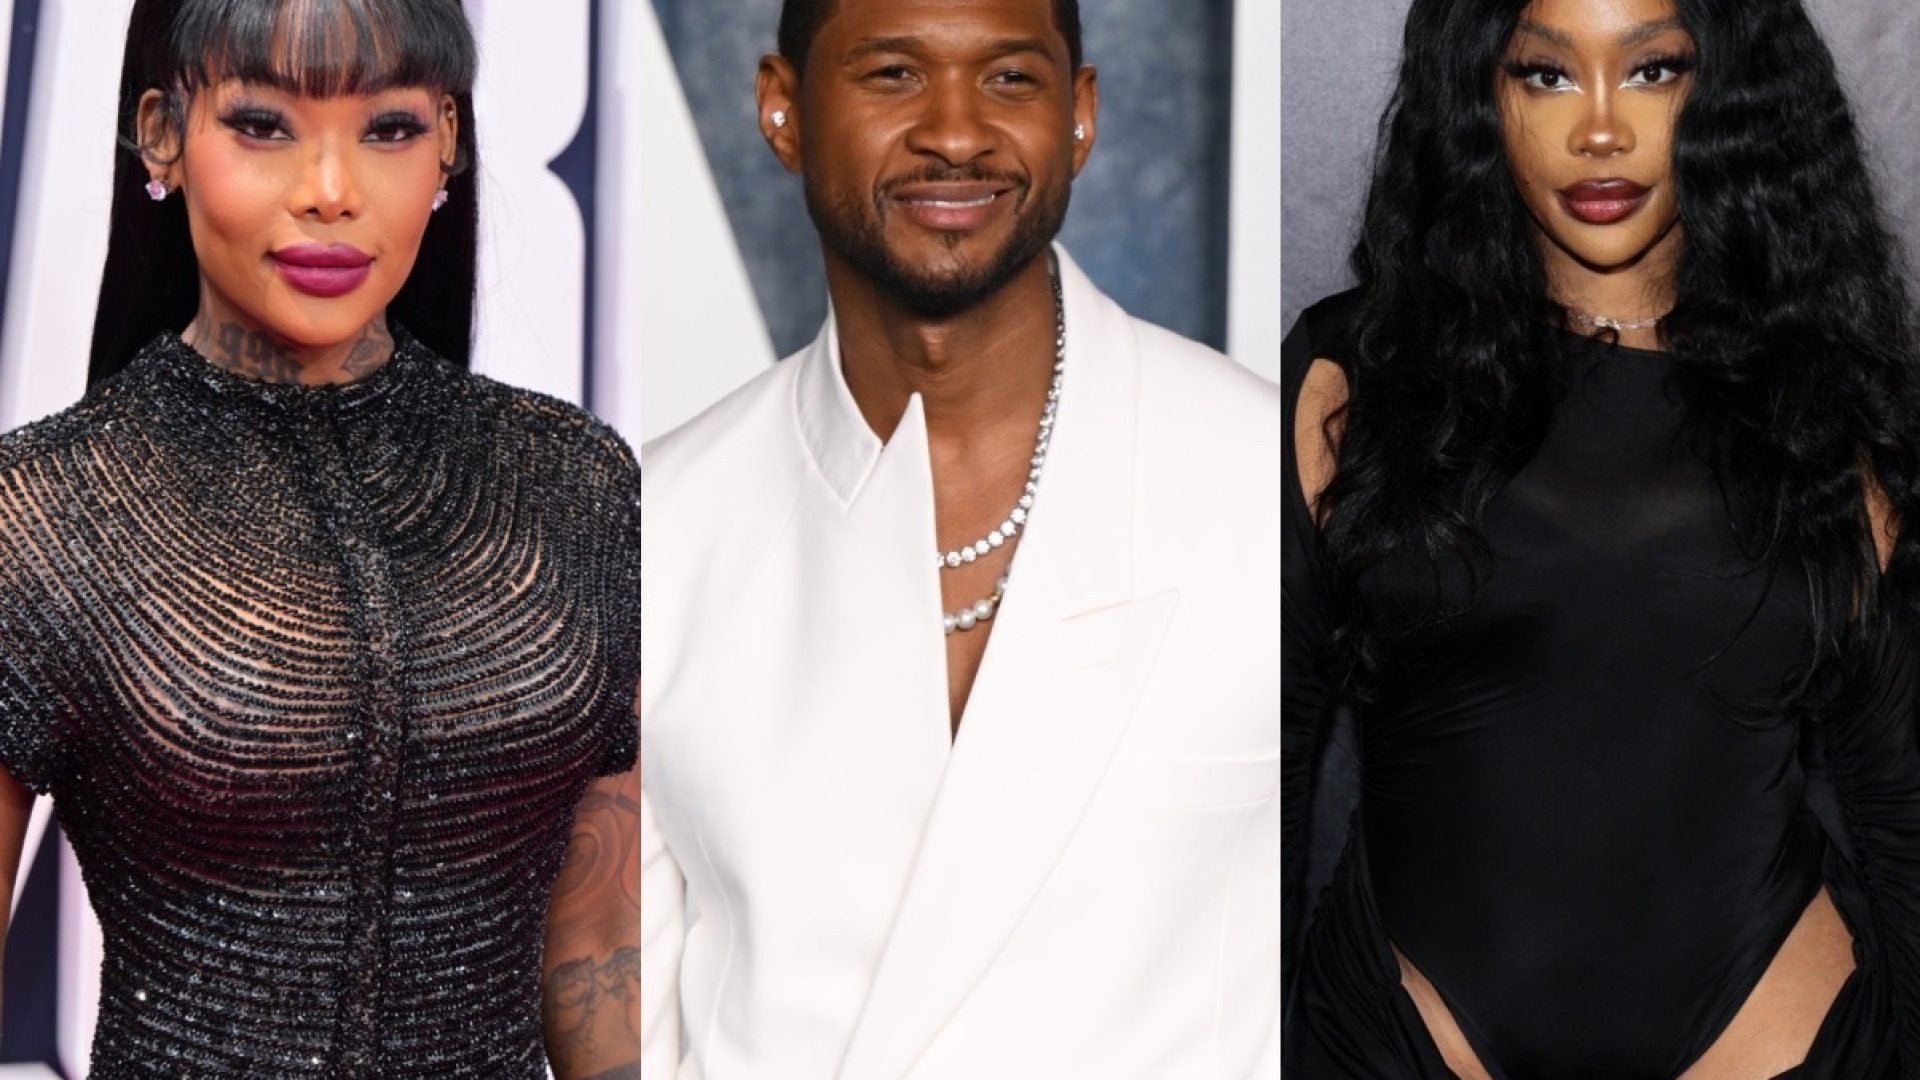 Summer Walker, SZA And Usher Lead Nominations For 2023 Soul Train Awards